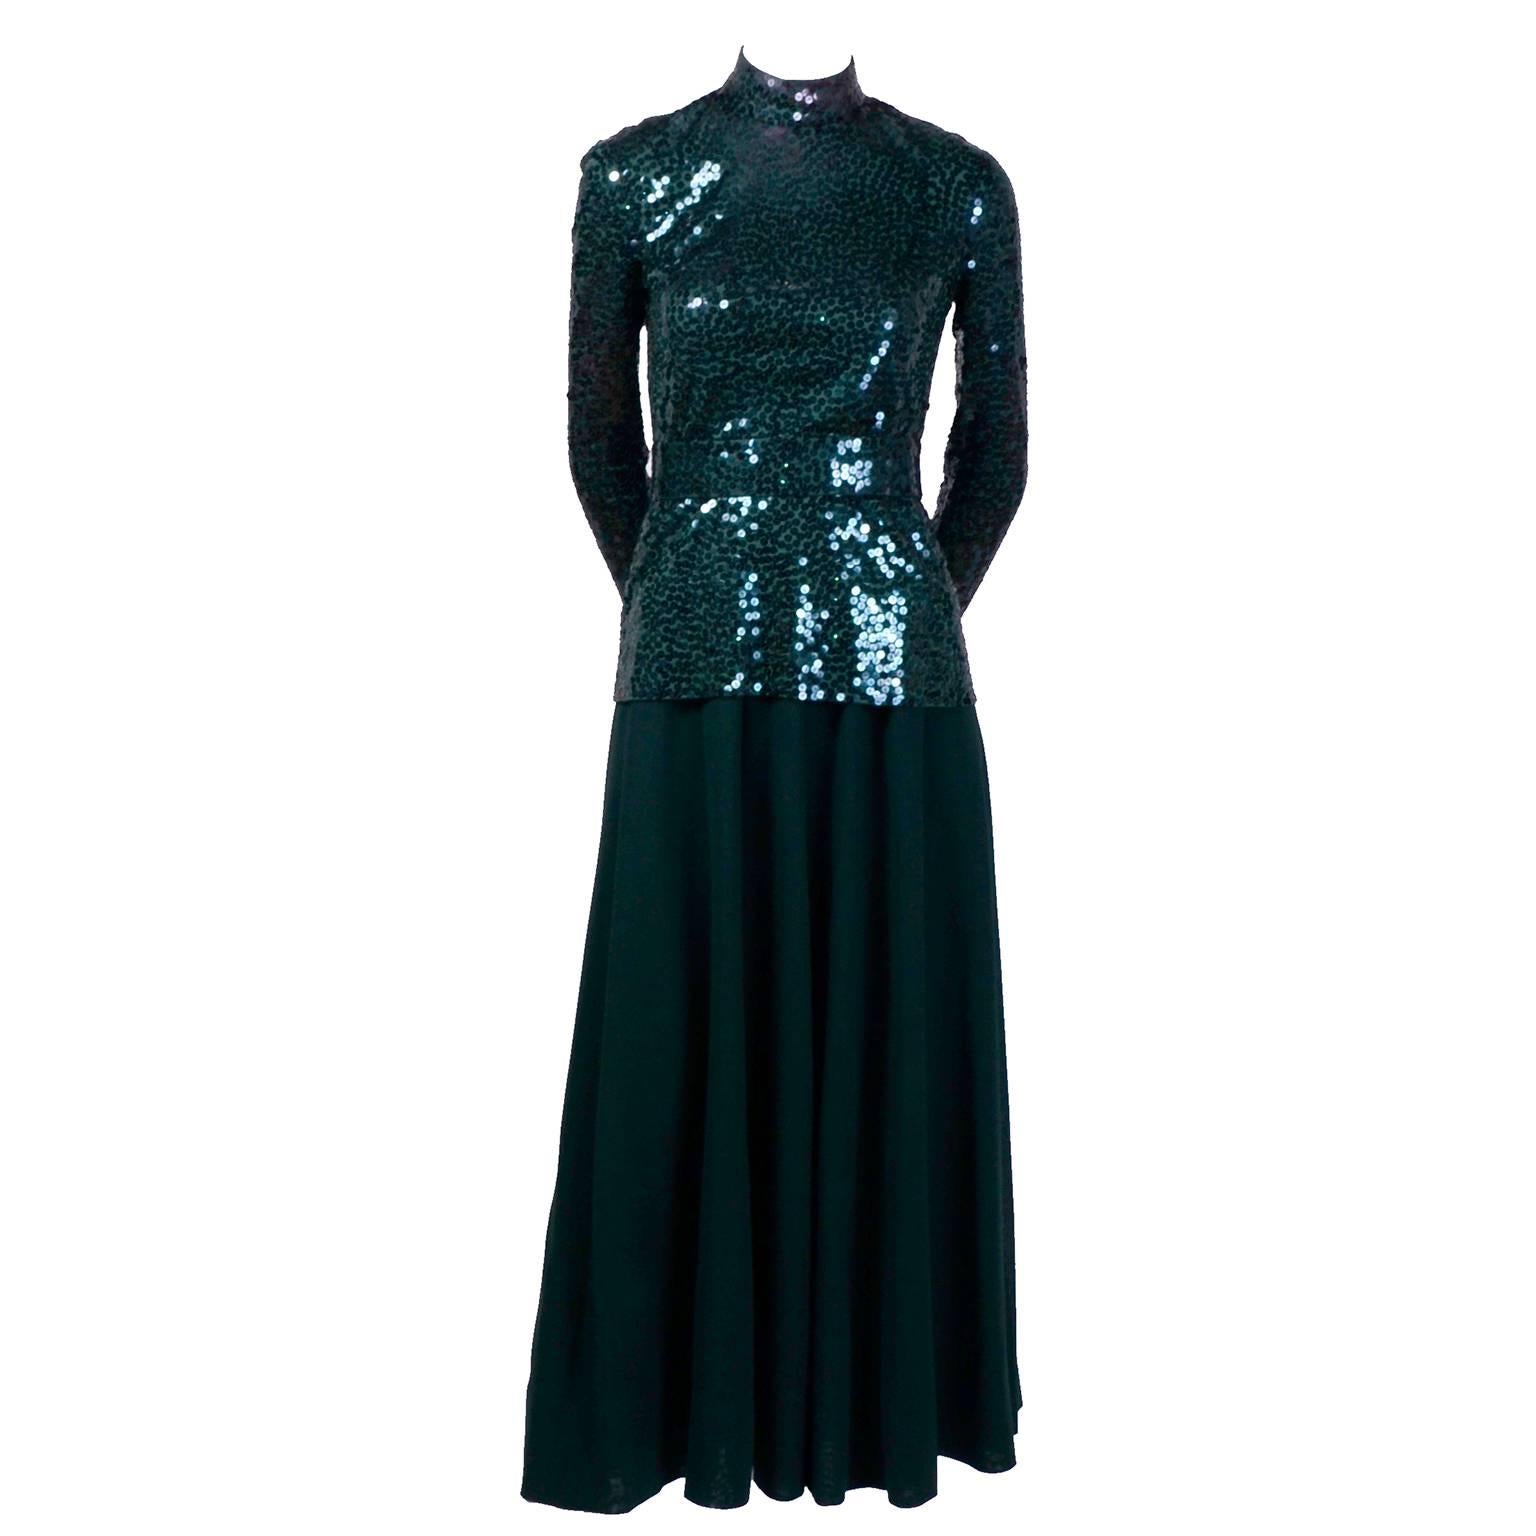 Women's Norman Norell Vintage Dress in Green W/ Sequins Prominent Fashion Family Estate